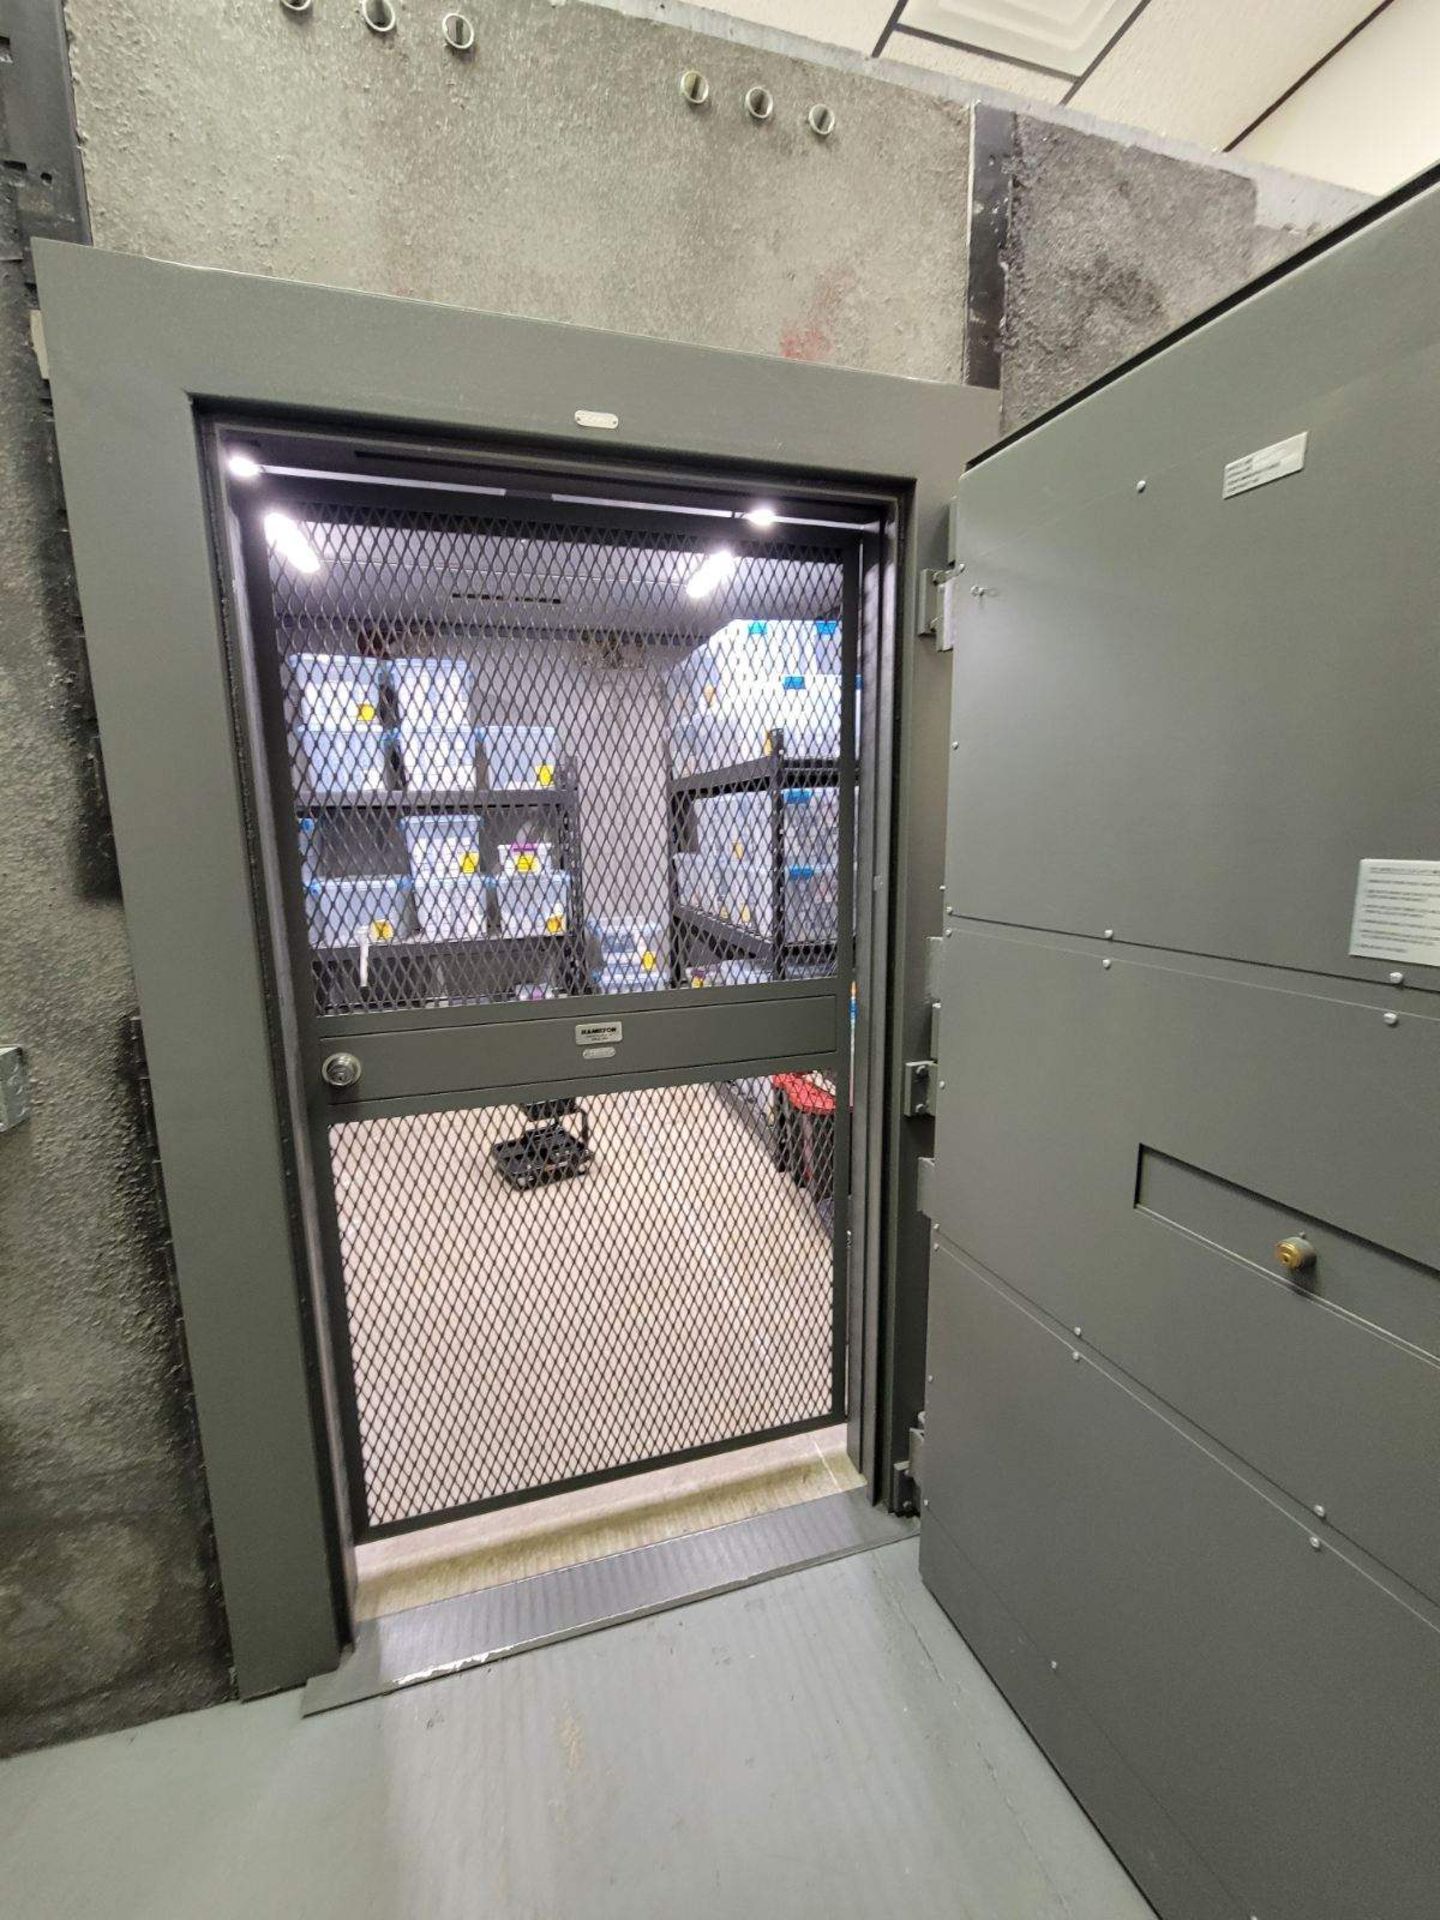 Used Hamilton Class-5 Security Bank Vault. Build-In-Place. OAD: 145" L/D x 145" x 106" H - Image 5 of 6